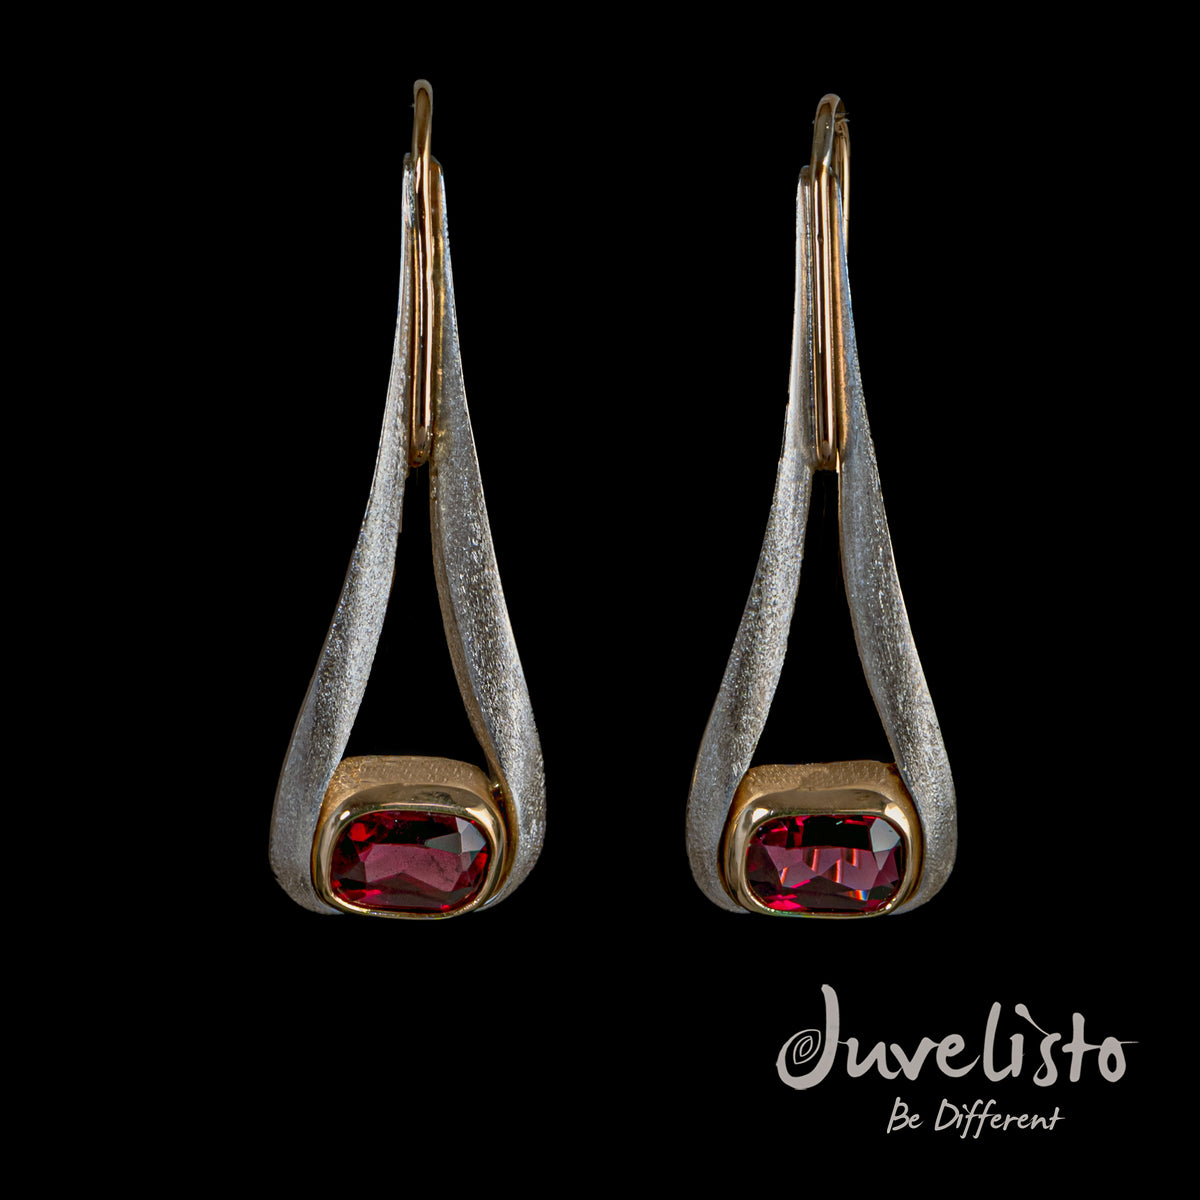 Juvelisto Design | Sterling Silver and 14K gold Earrings with Faceted Rhodolite Garnets